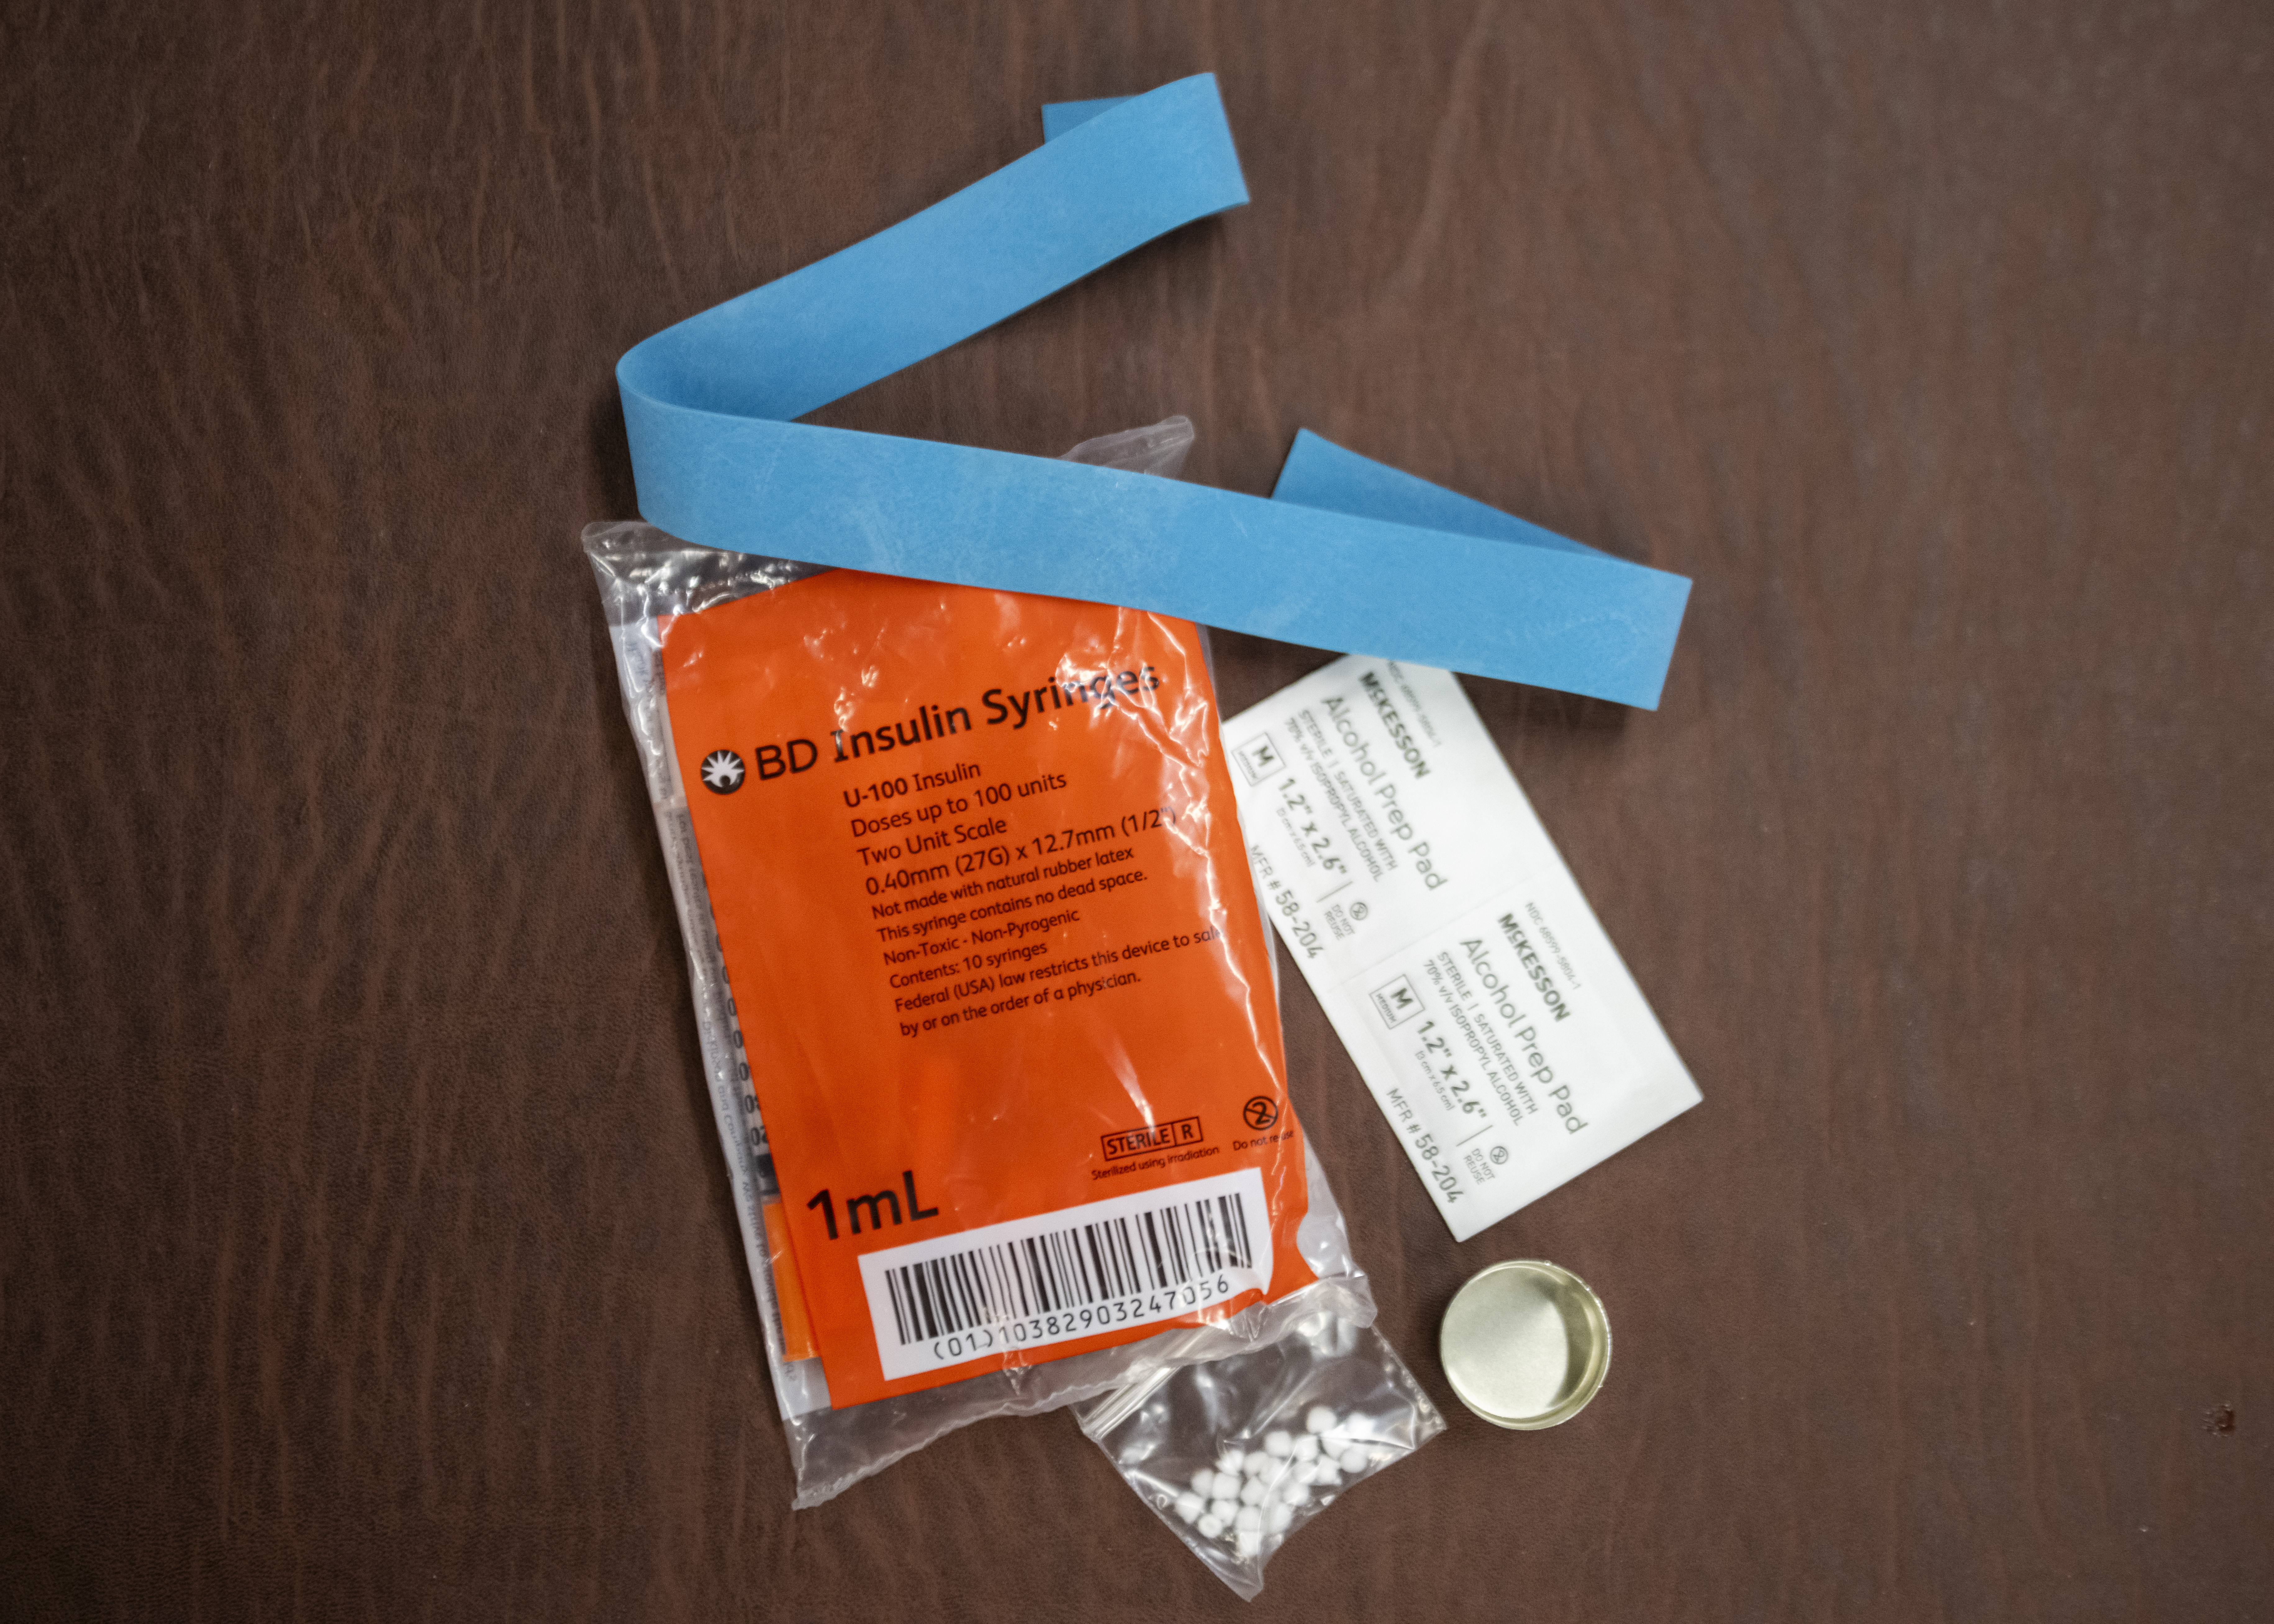 A close up of a clean syringe kit wrapped in plastic with an orange label